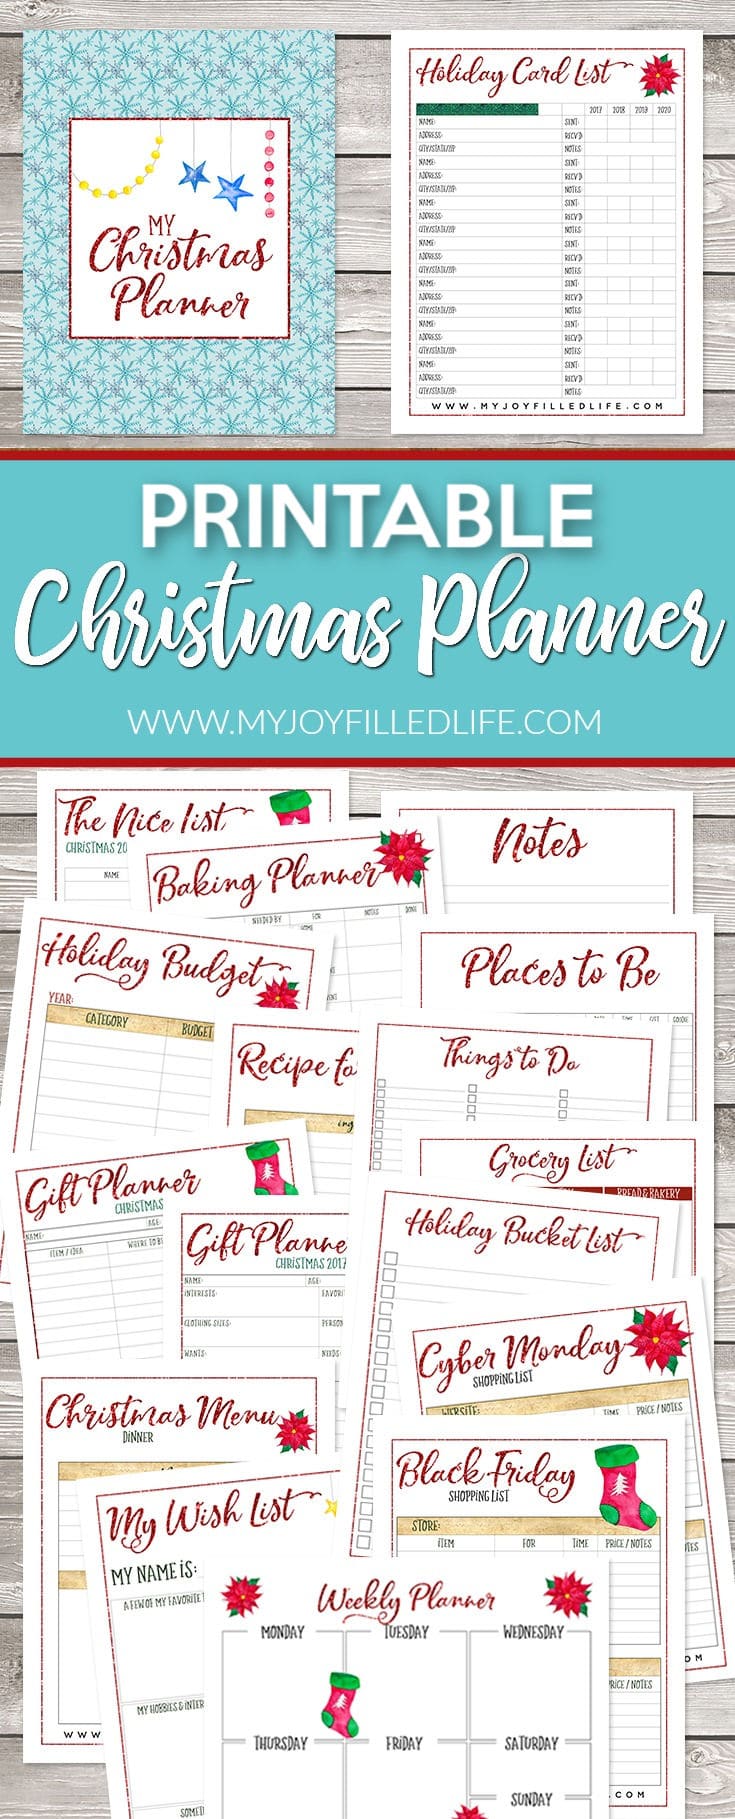 A printable Christmas planner that you download and print out at home. It contains 22 different planning pages that will help you get organized and ready for the Christmas season. #Christmas #Christmasplanning #Christmasplanner #printable